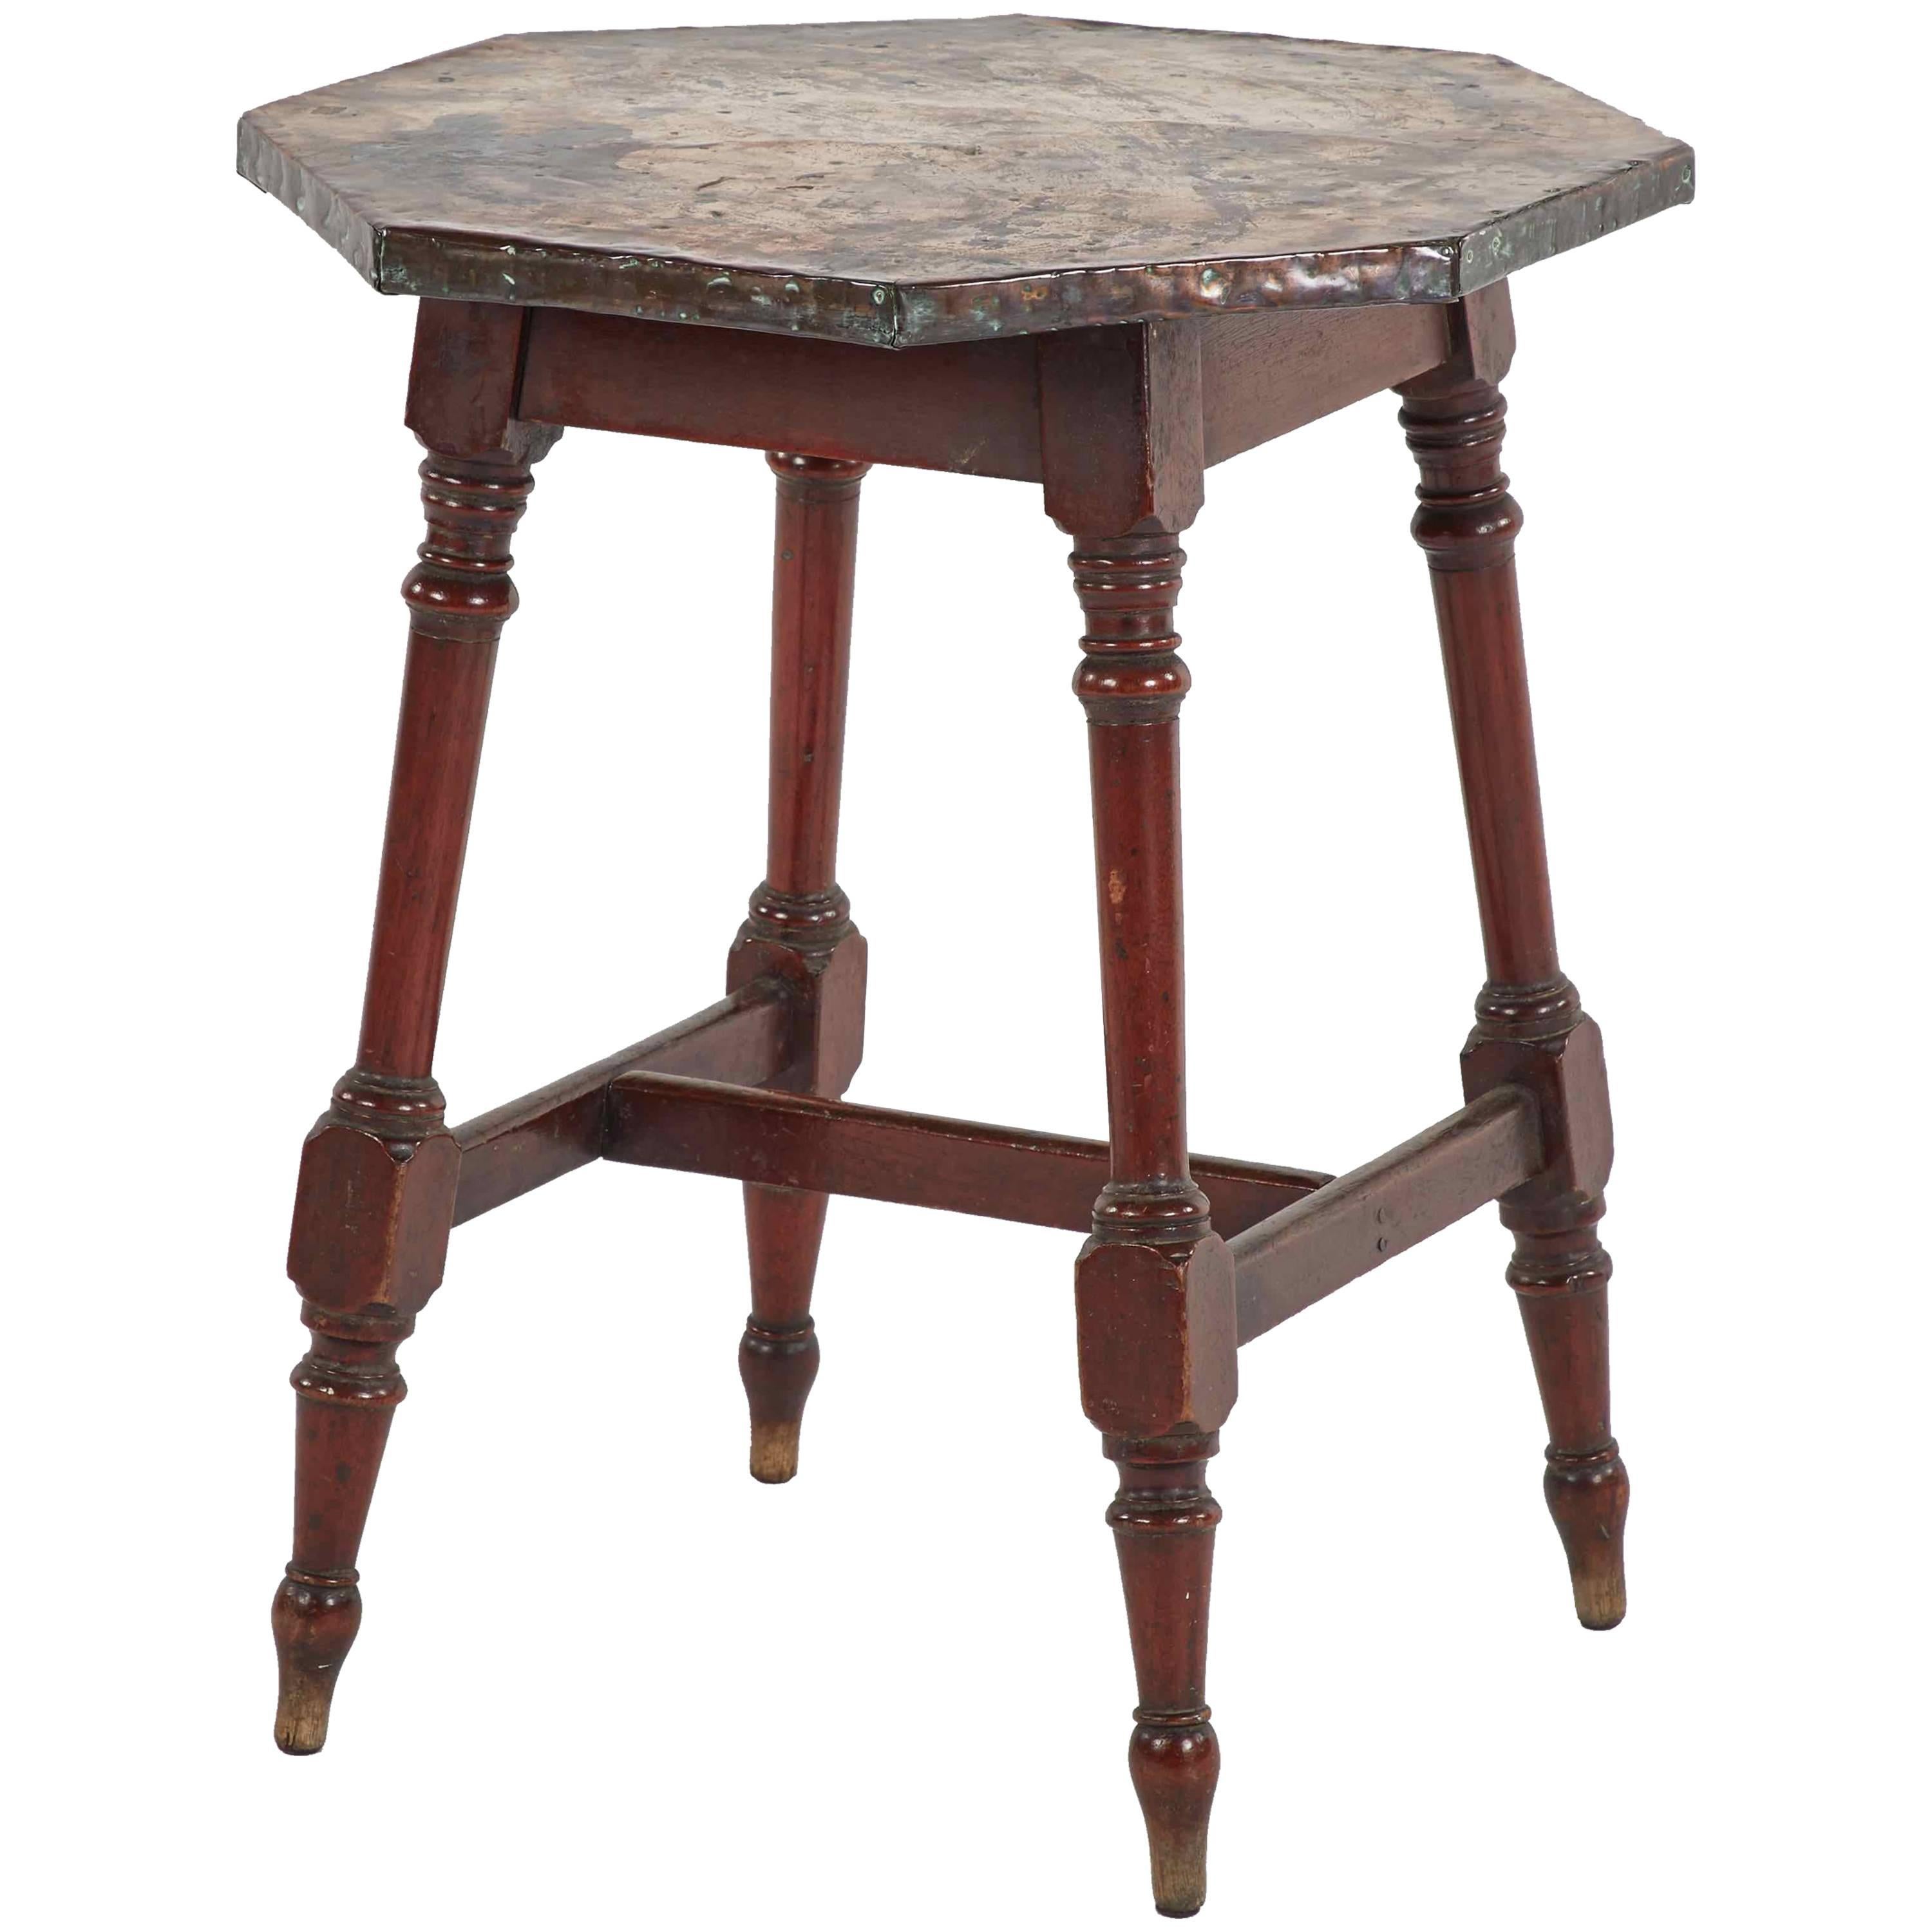 Late 19th Century Copper Top Side Table with Wooden Legs from England